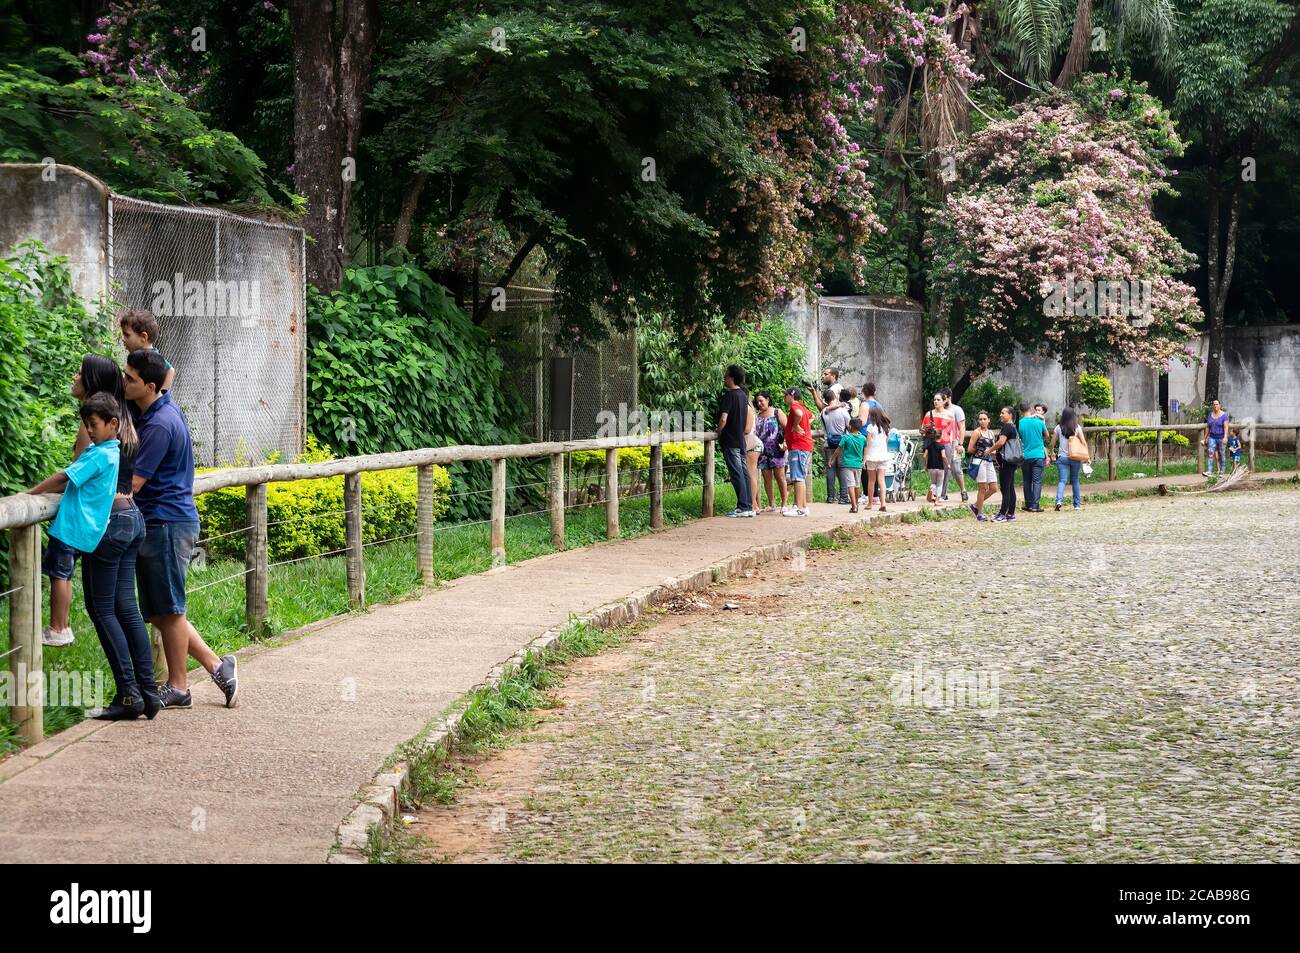 Zoo visitors checking the wild animal enclosures at a wooden fence inside Belo Horizonte zoological park. Stock Photo